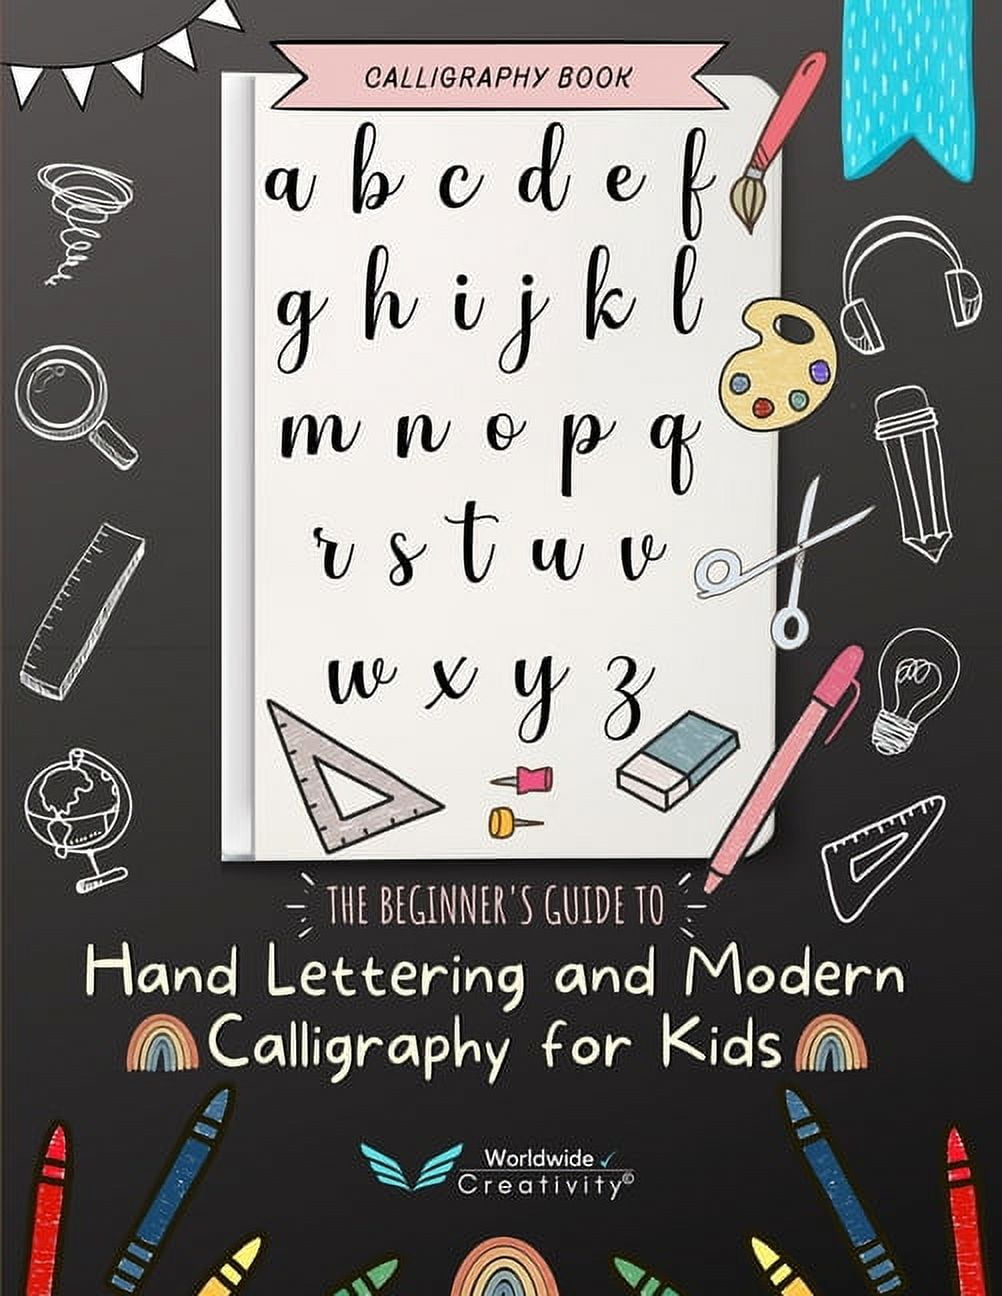 Calligraphy and Hand Lettering for Beginners: An Interactive Calligraphy &  Lettering Workbook With Guides, Instructions, Drills, Practice Pages & More  (Hardcover)